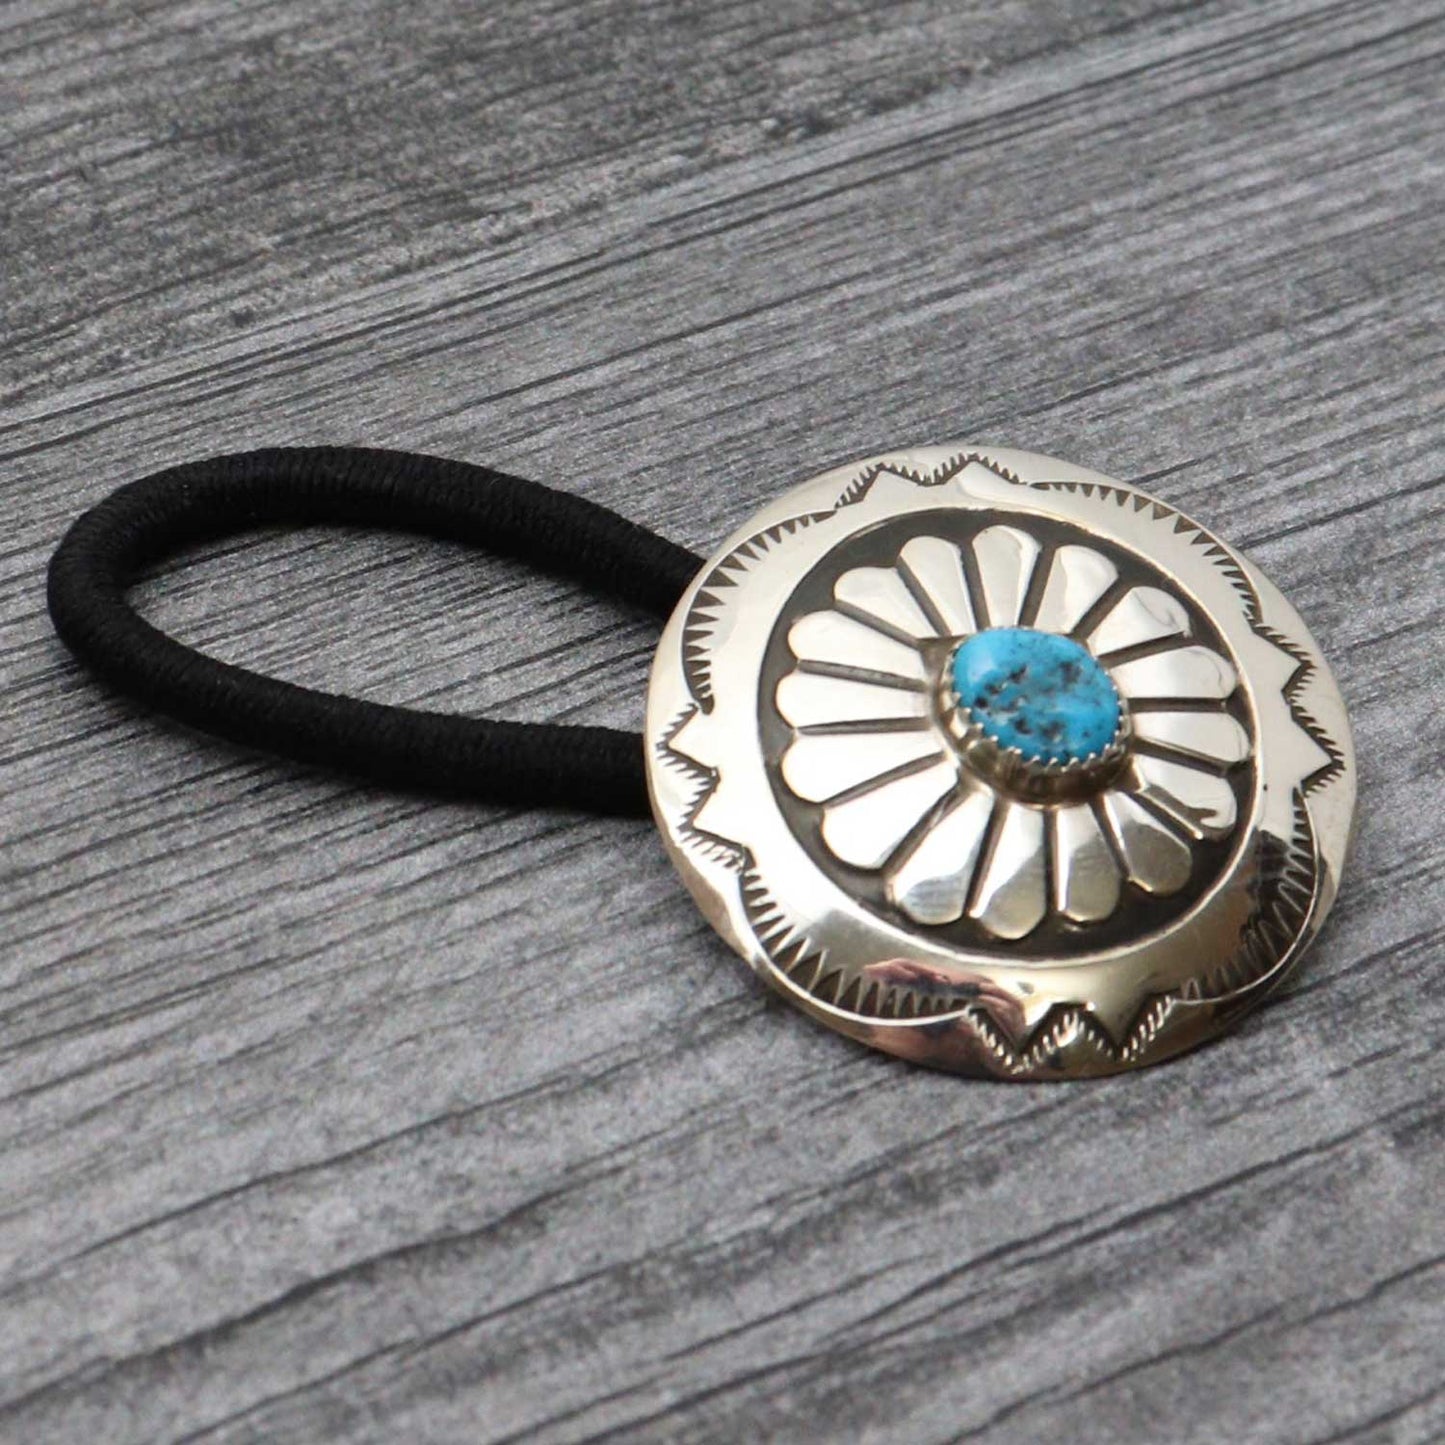 Turquoise & Stamped Silver Hair Tie by Jolene Begay